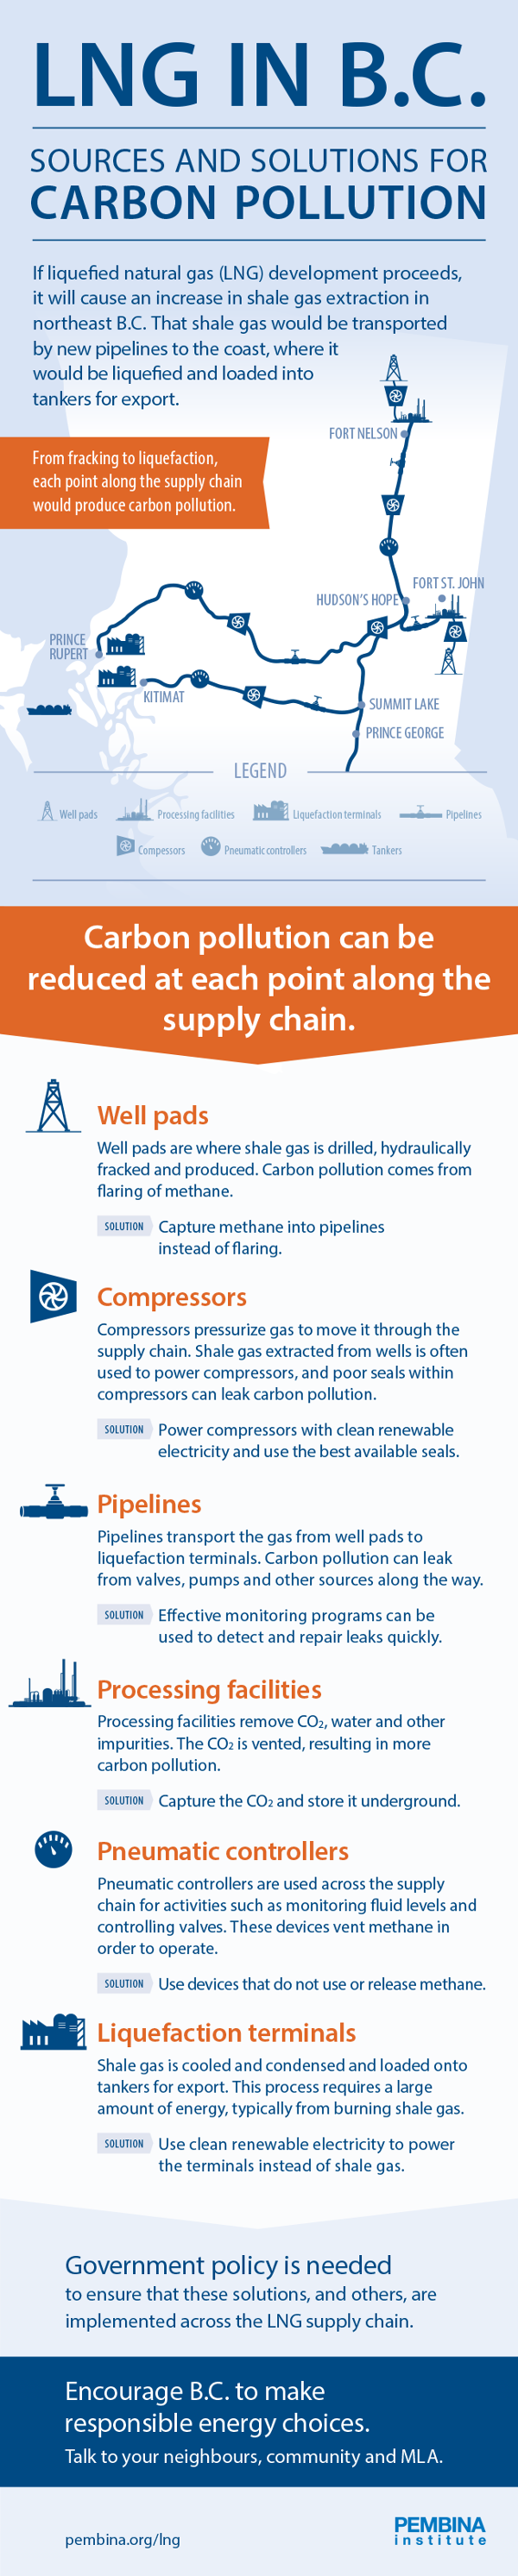 582px version of LNG infographic